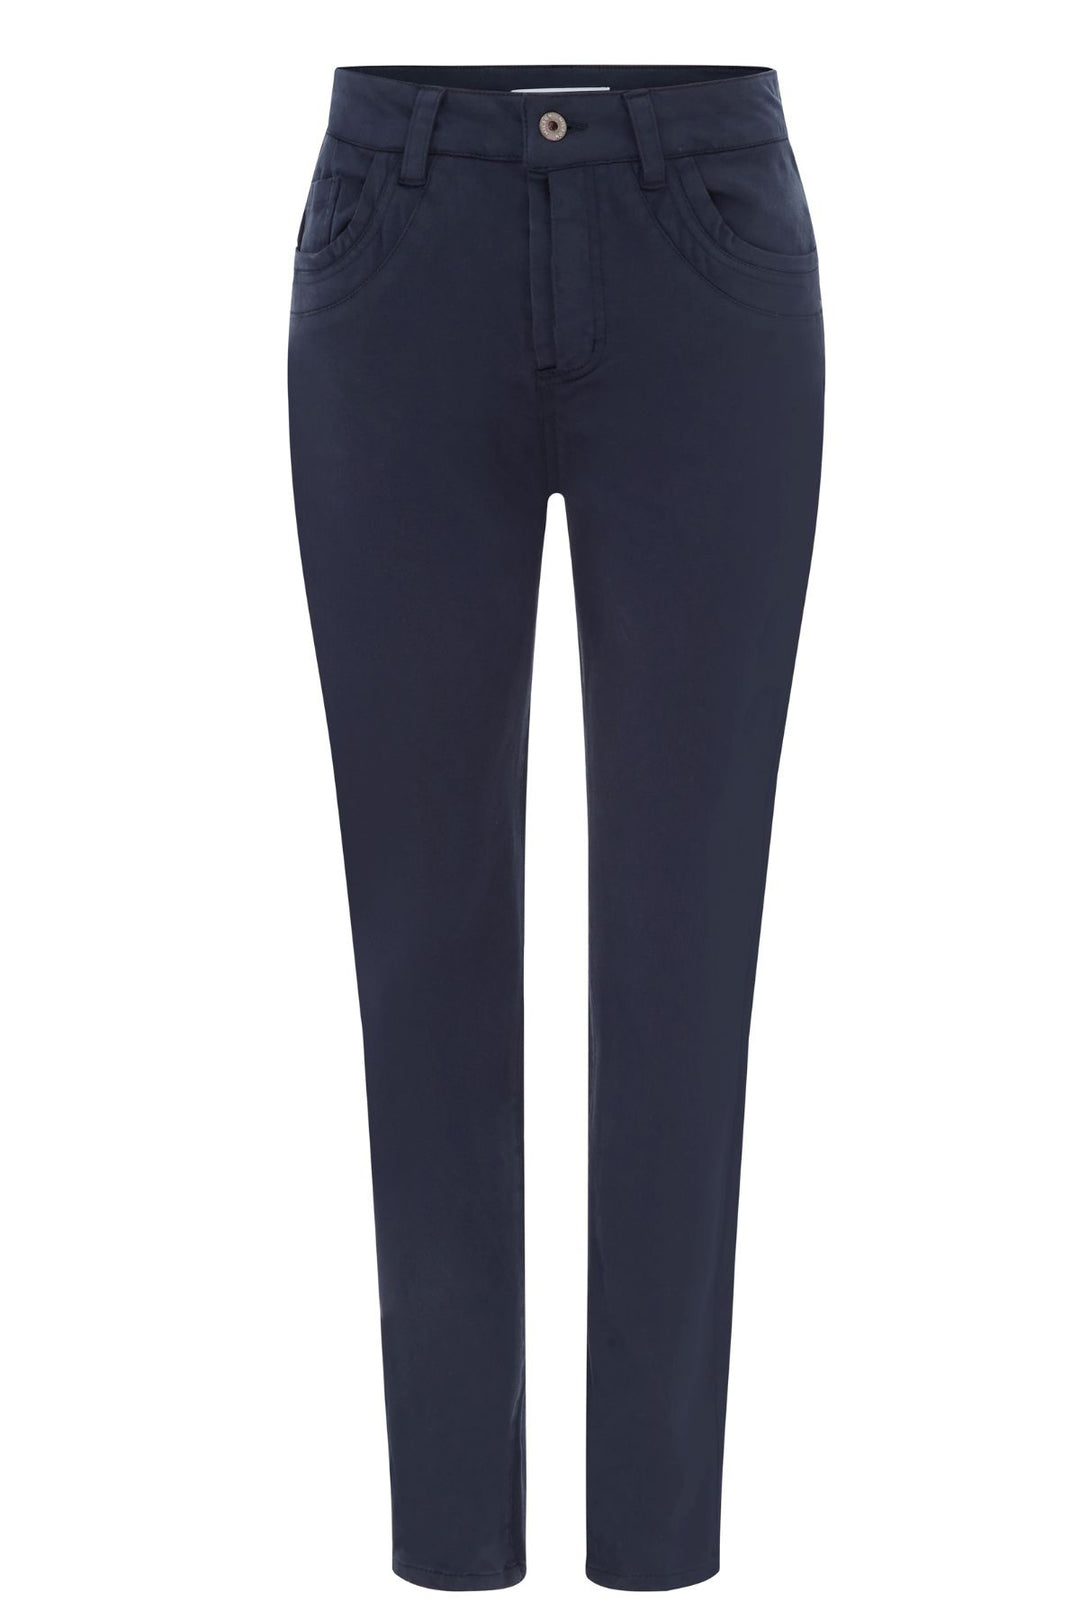 The classic Phoebe Jean by Milson, in french navy. These full-length jeans feature a mid-rise and cotton construction for superior comfort with a button fly. Upgrade your everyday style with this timeless look.  Brand : Milson Style Code : ML6150 Colour : French Navy Fabric : 98% Cotton 5% Spandex Wash separately, cold hand wash